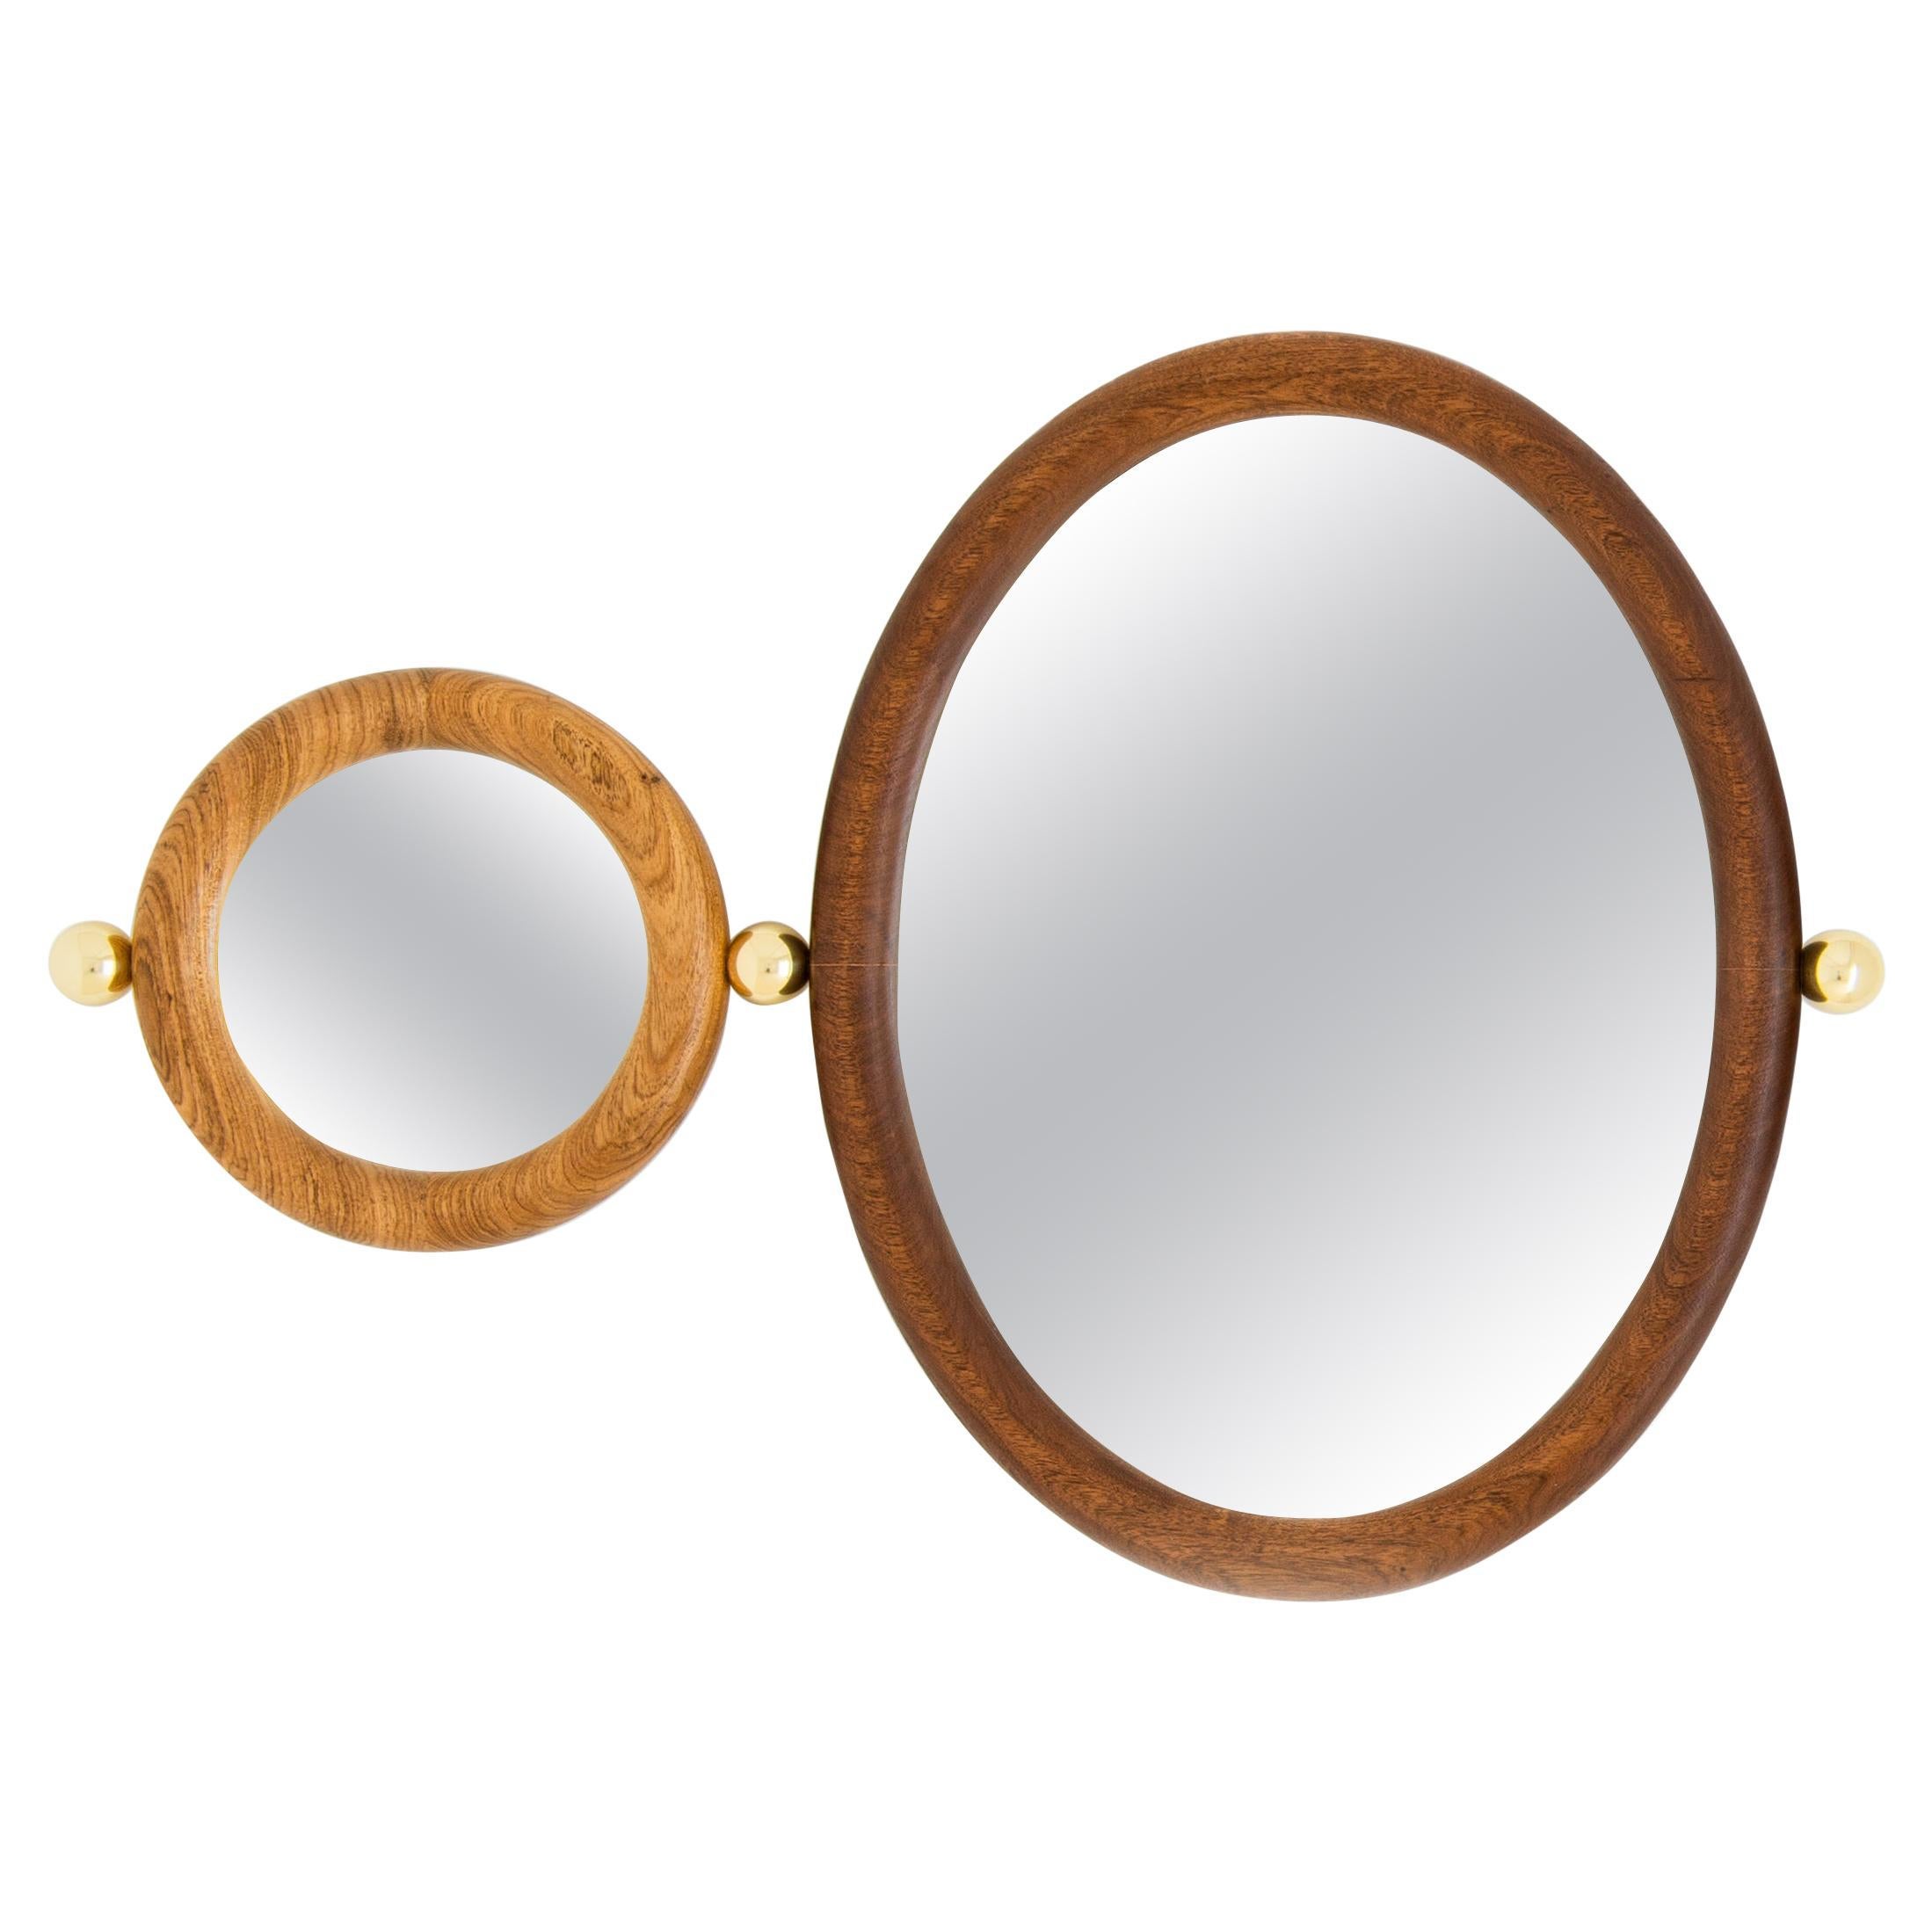 Set of 2 Aro Mirrors by Leandro Garcia Contemporary Brazil Design For Sale